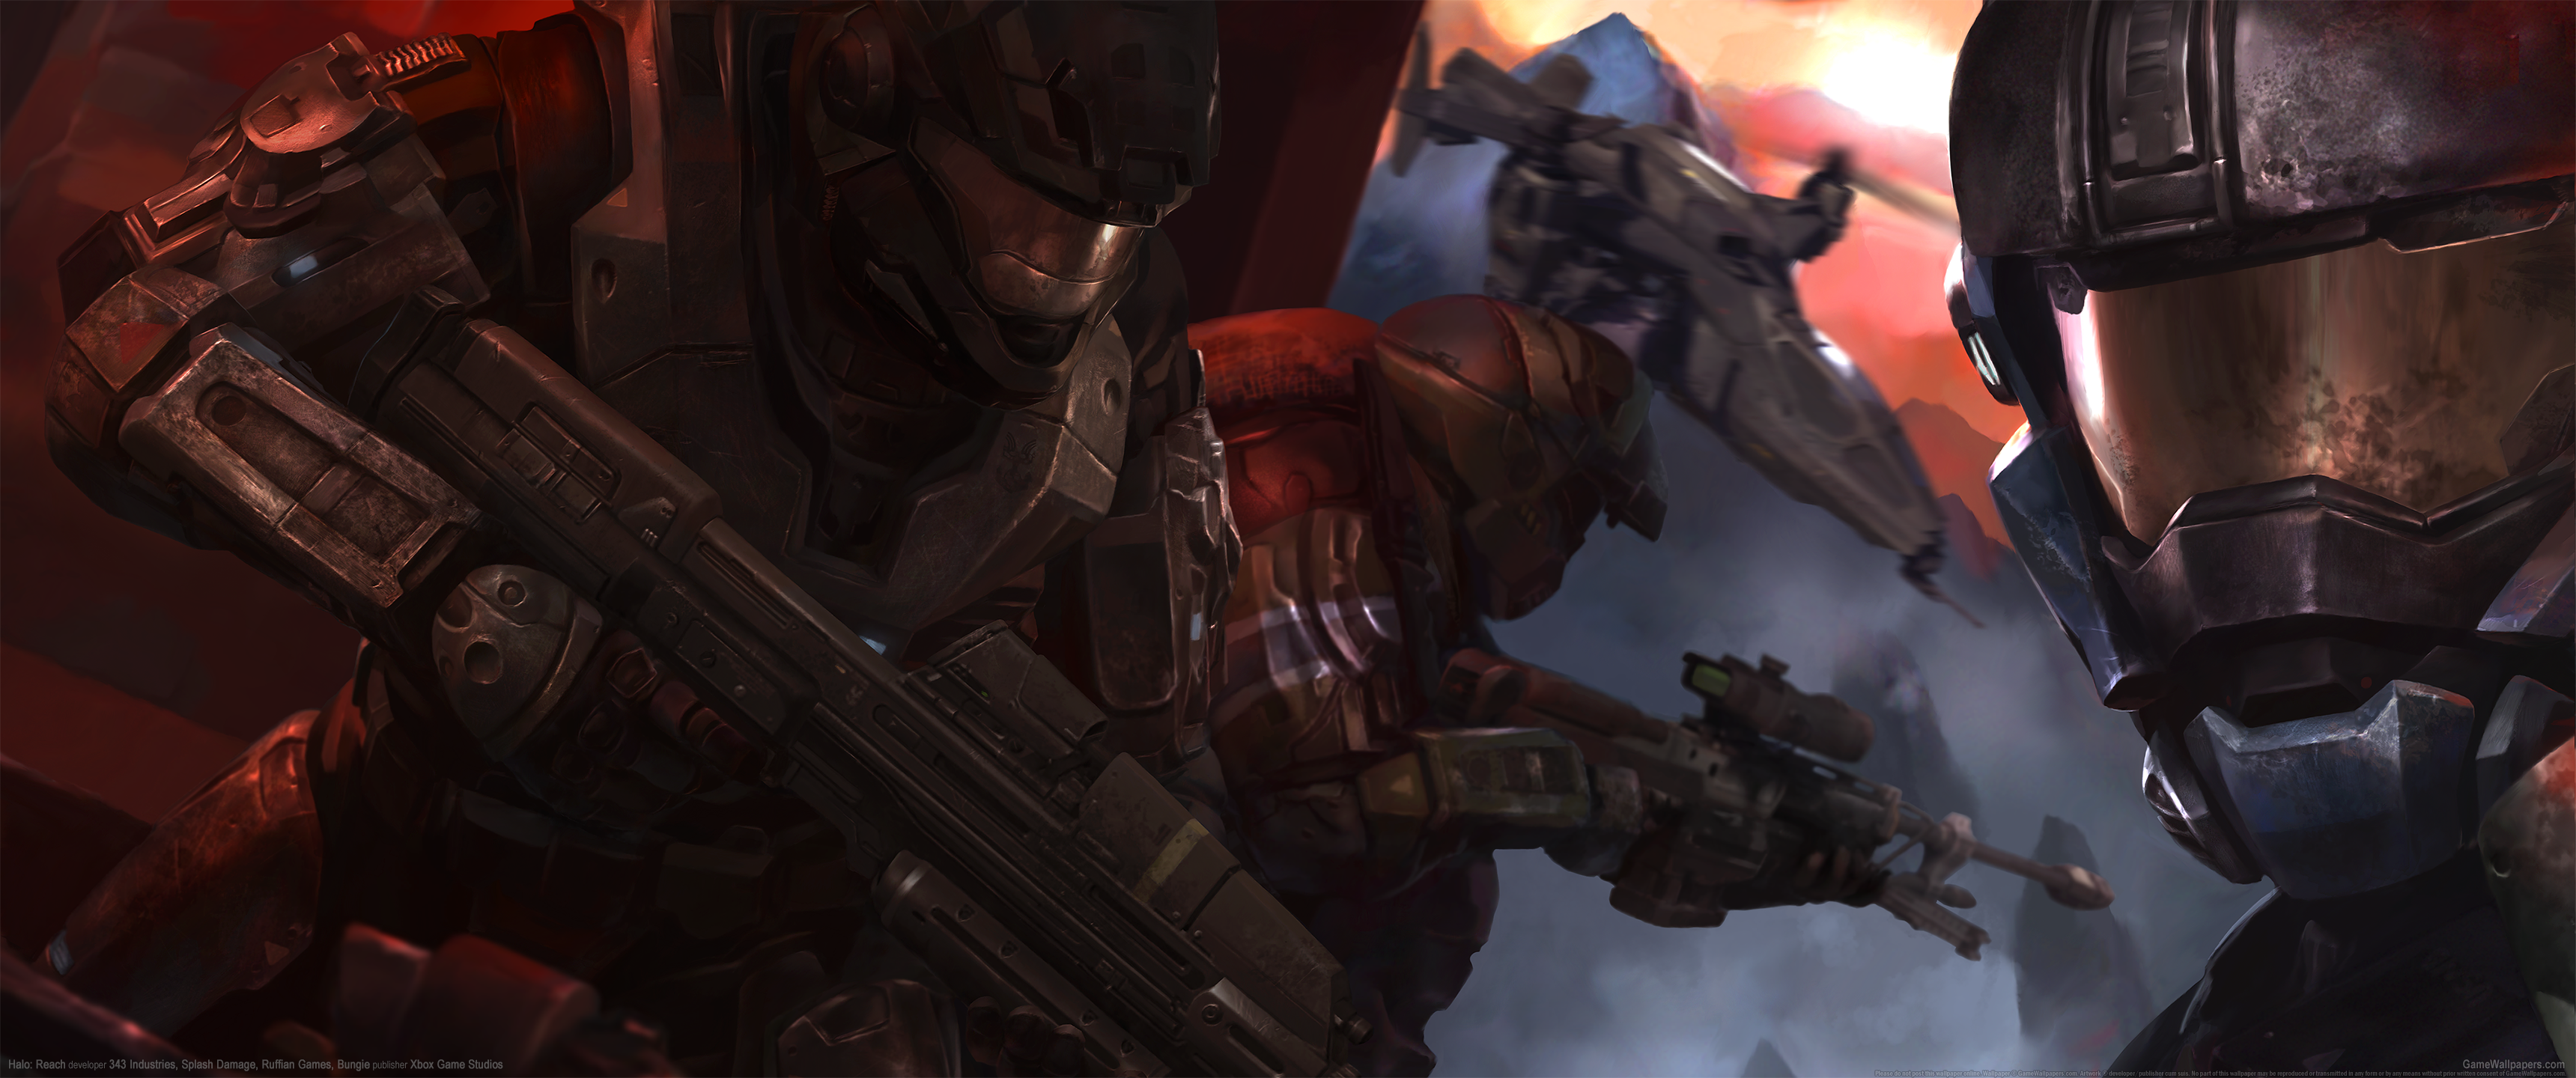 Halo: Reach 3440x1440 wallpaper or background 09